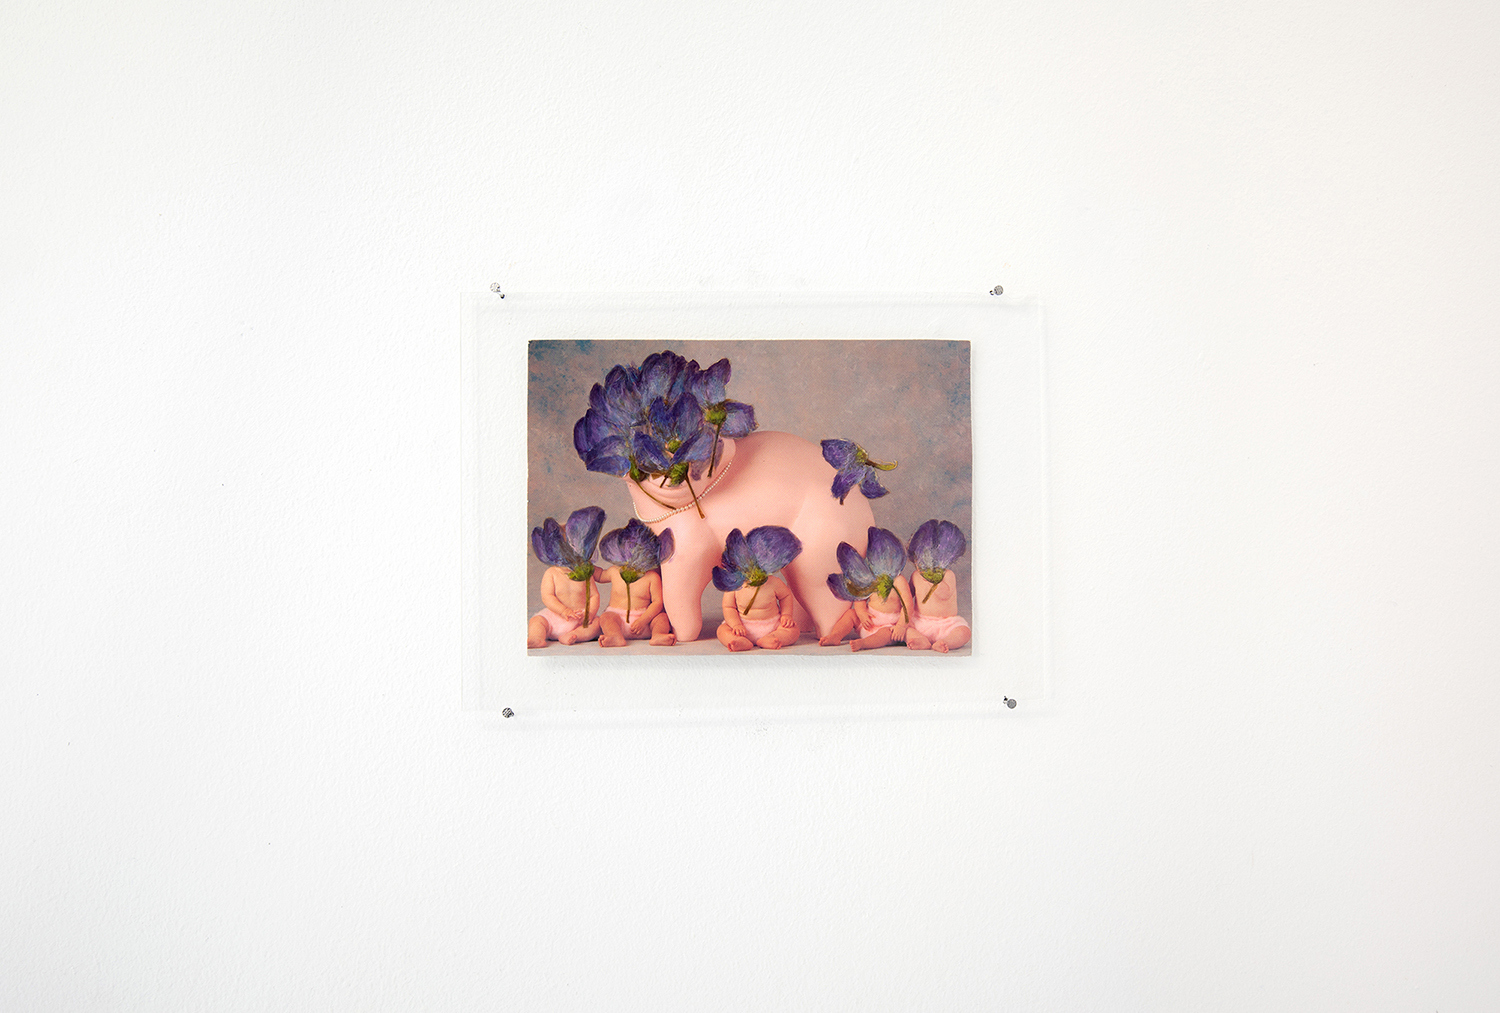 After Anne Geddes, 2020, dried flowers and acrylic paint on postcard, 15x10,7 cm